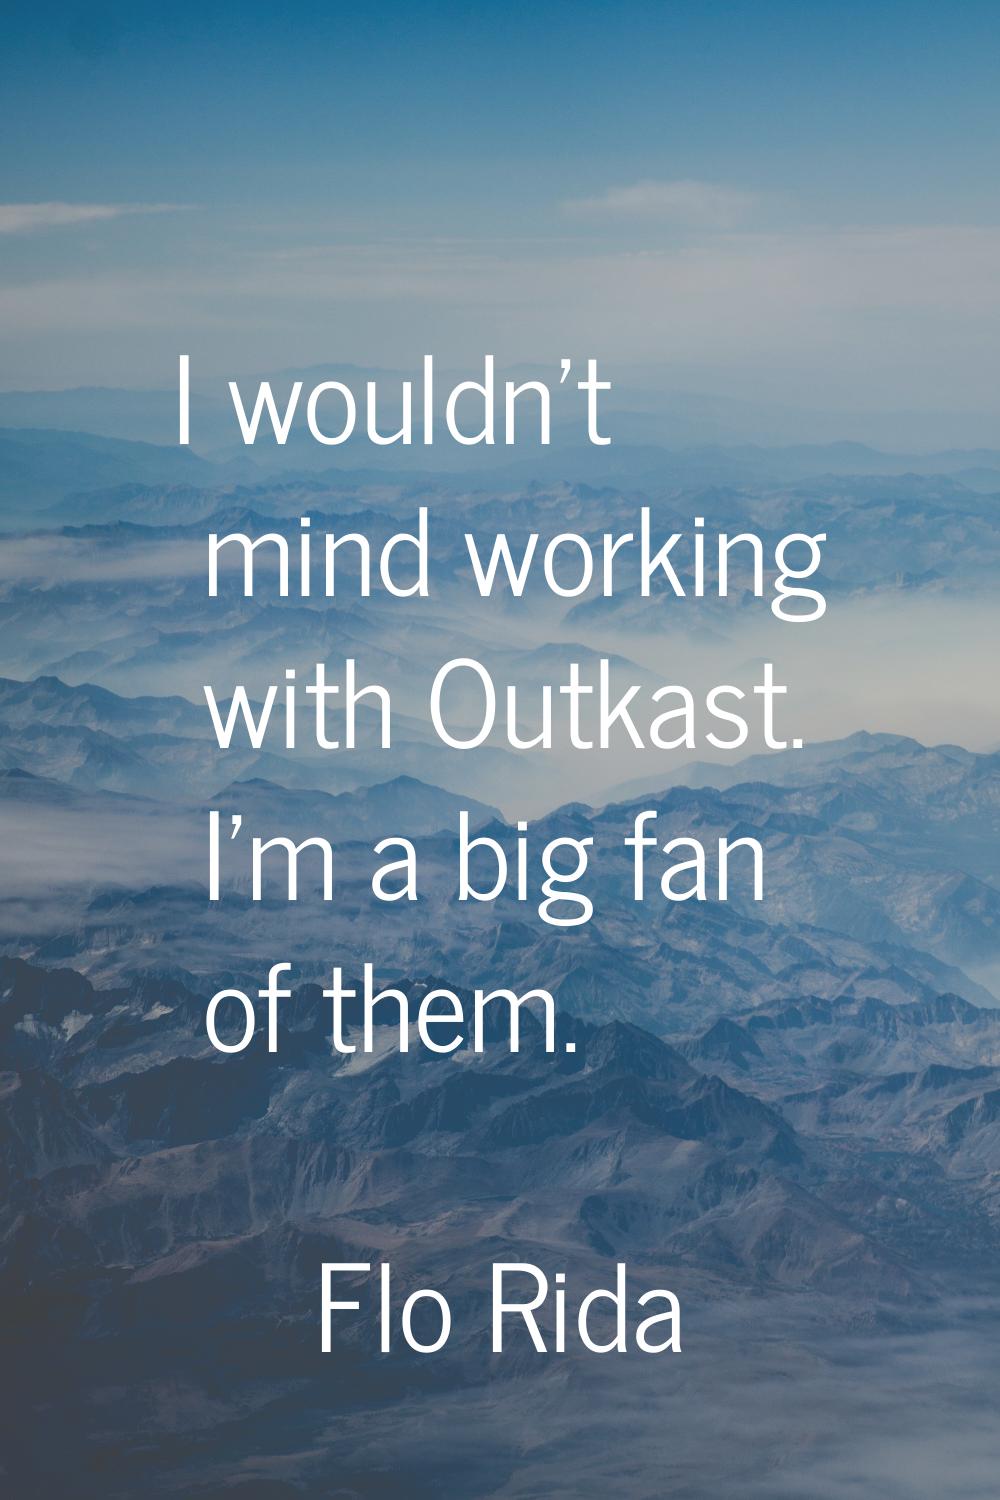 I wouldn't mind working with Outkast. I'm a big fan of them.